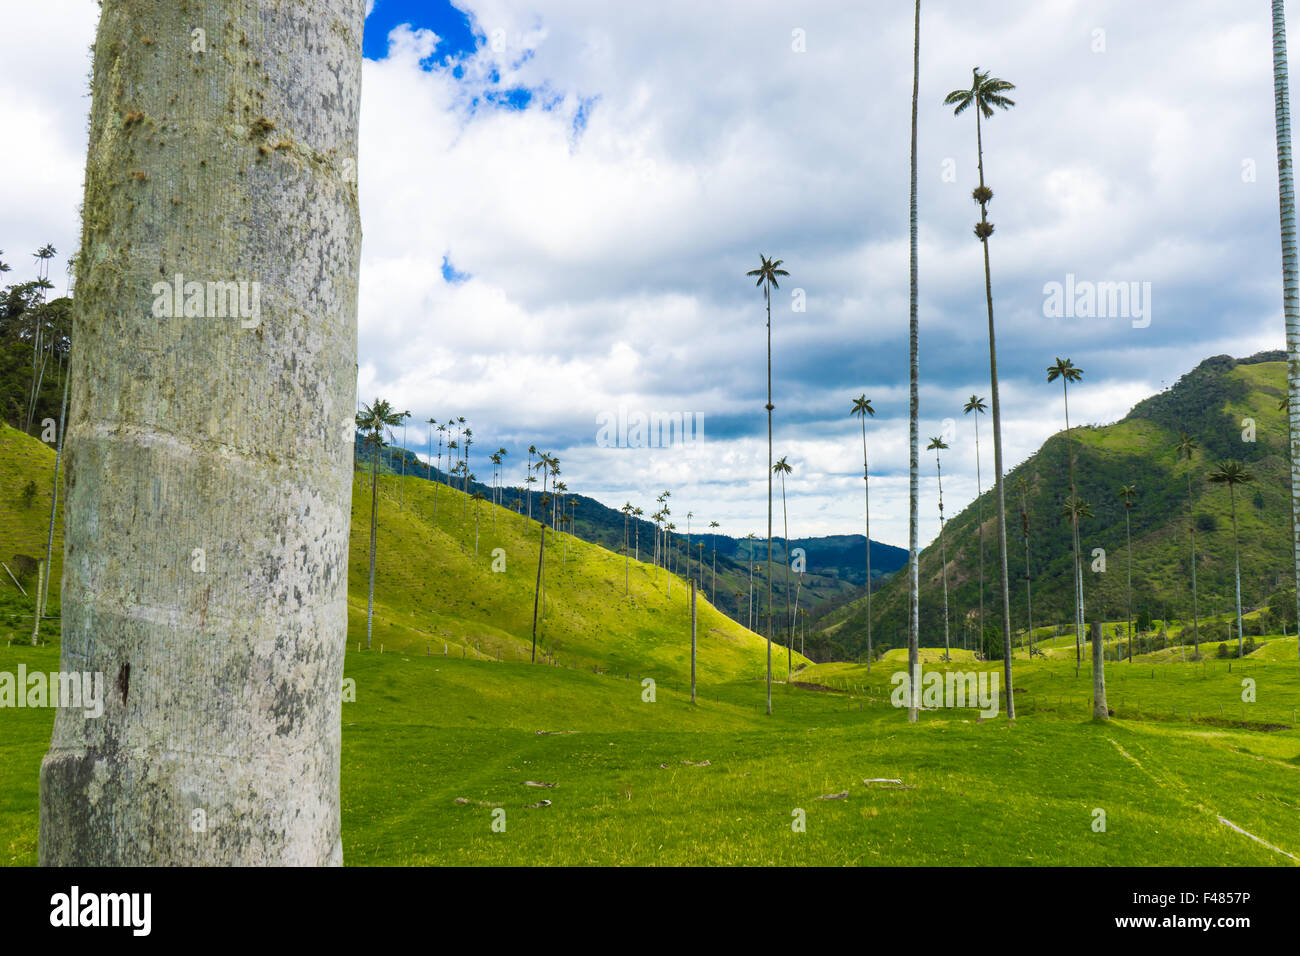 The Valle de Cocora, home to the world's largest palm trees. June, 2015. QUindio, Colombia. Stock Photo